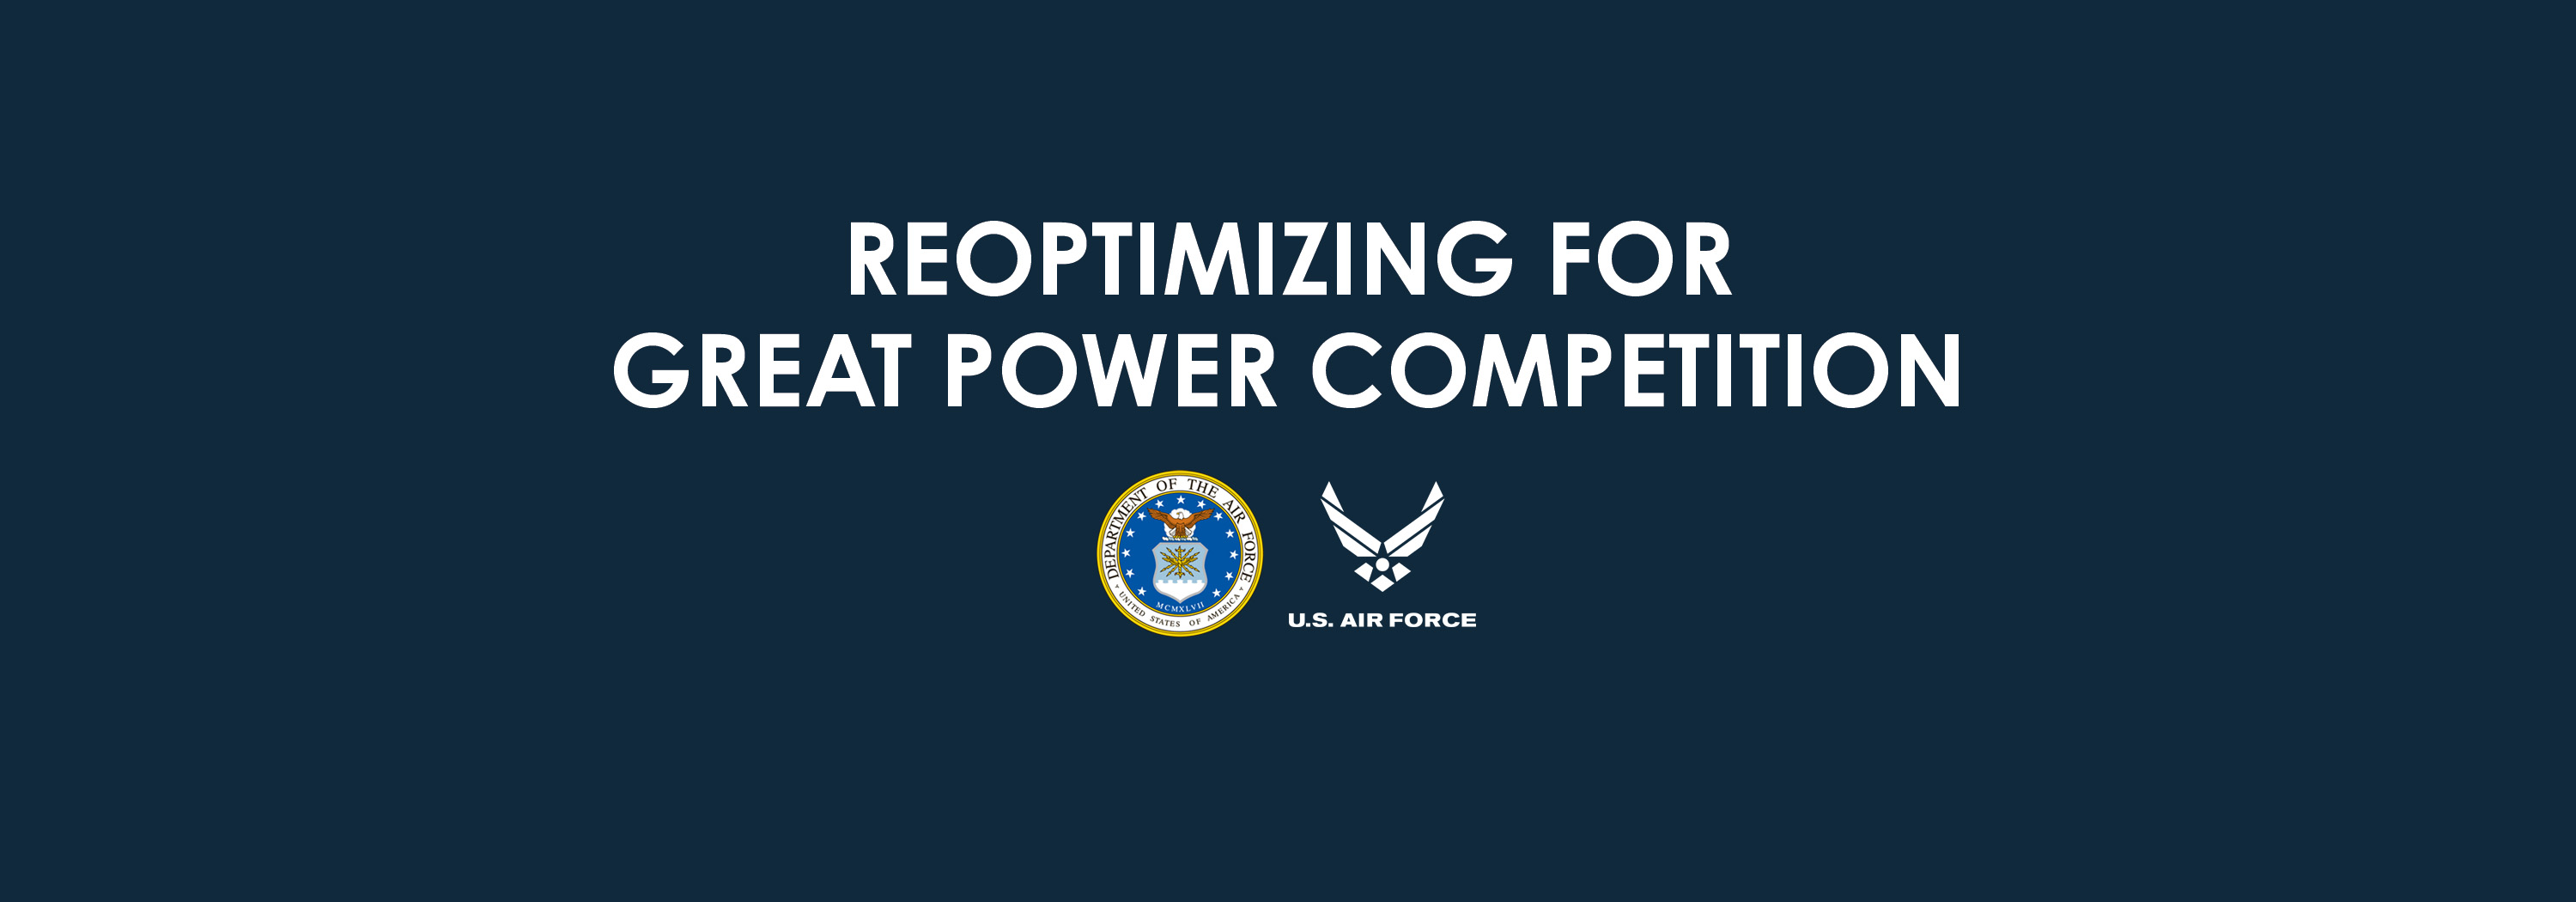 Reoptimization for Great Power Competition